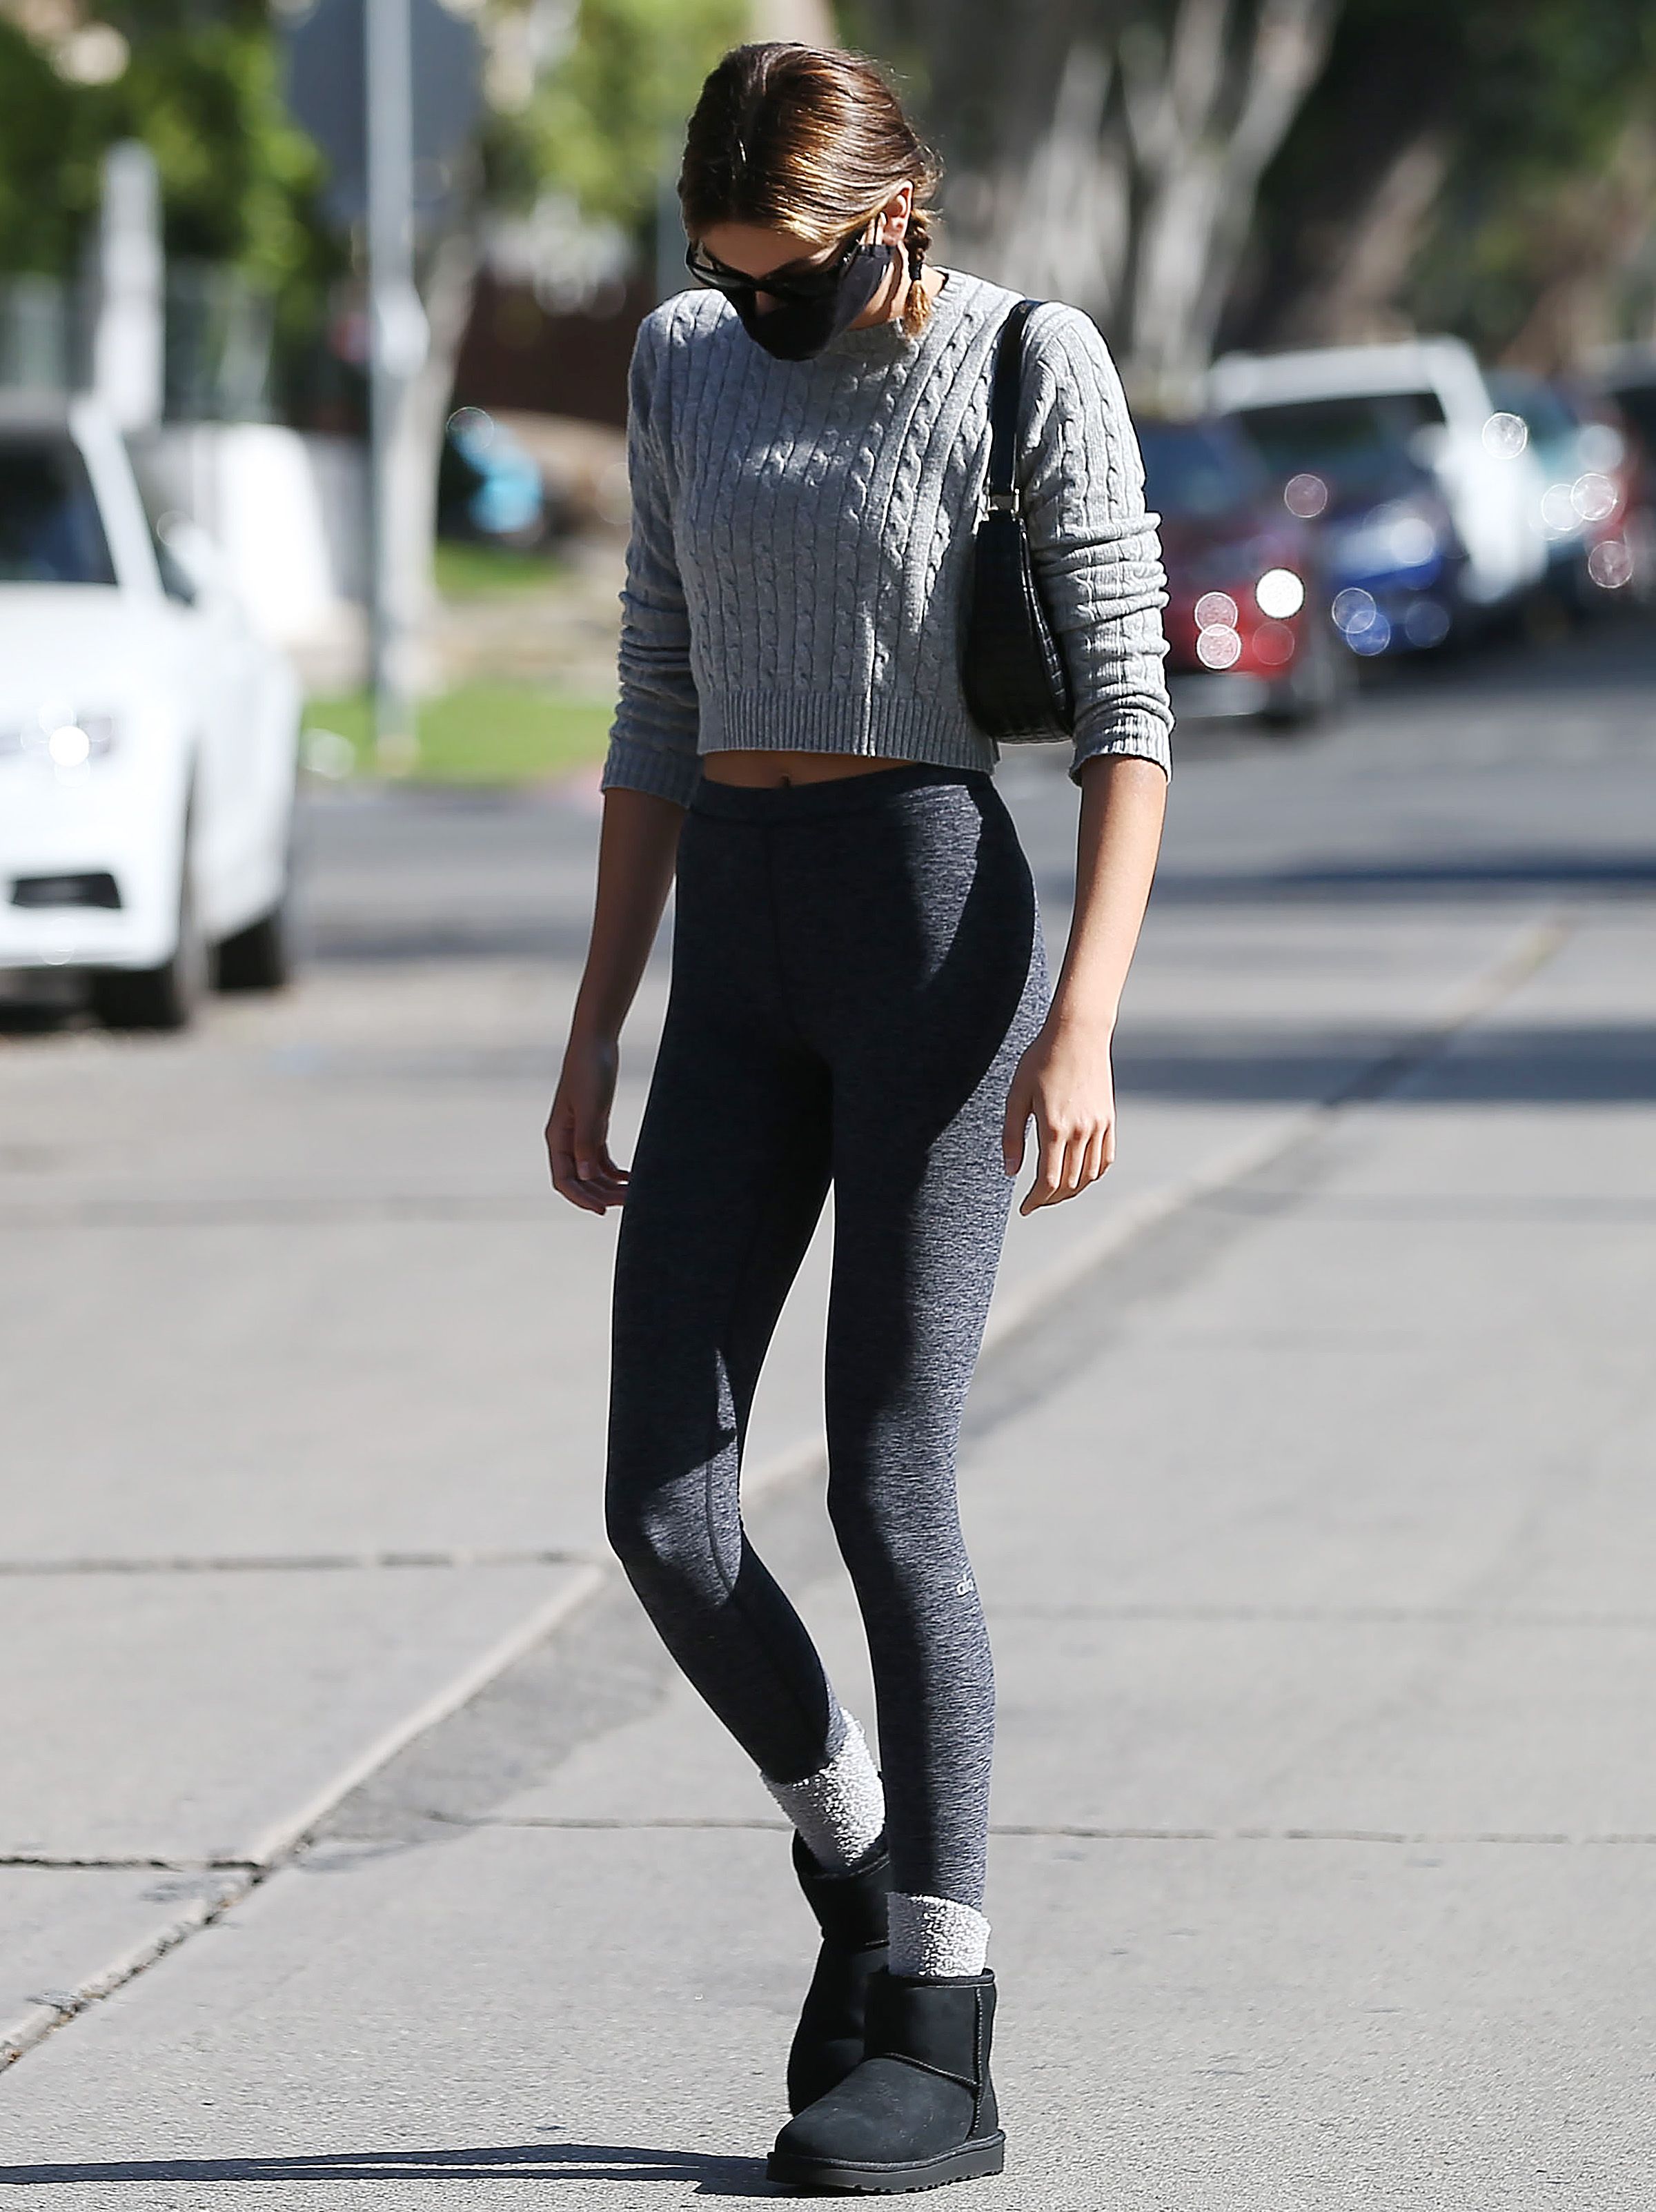 The Celeb-Loved Leggings That Fit Like a Second Skin Are Still on